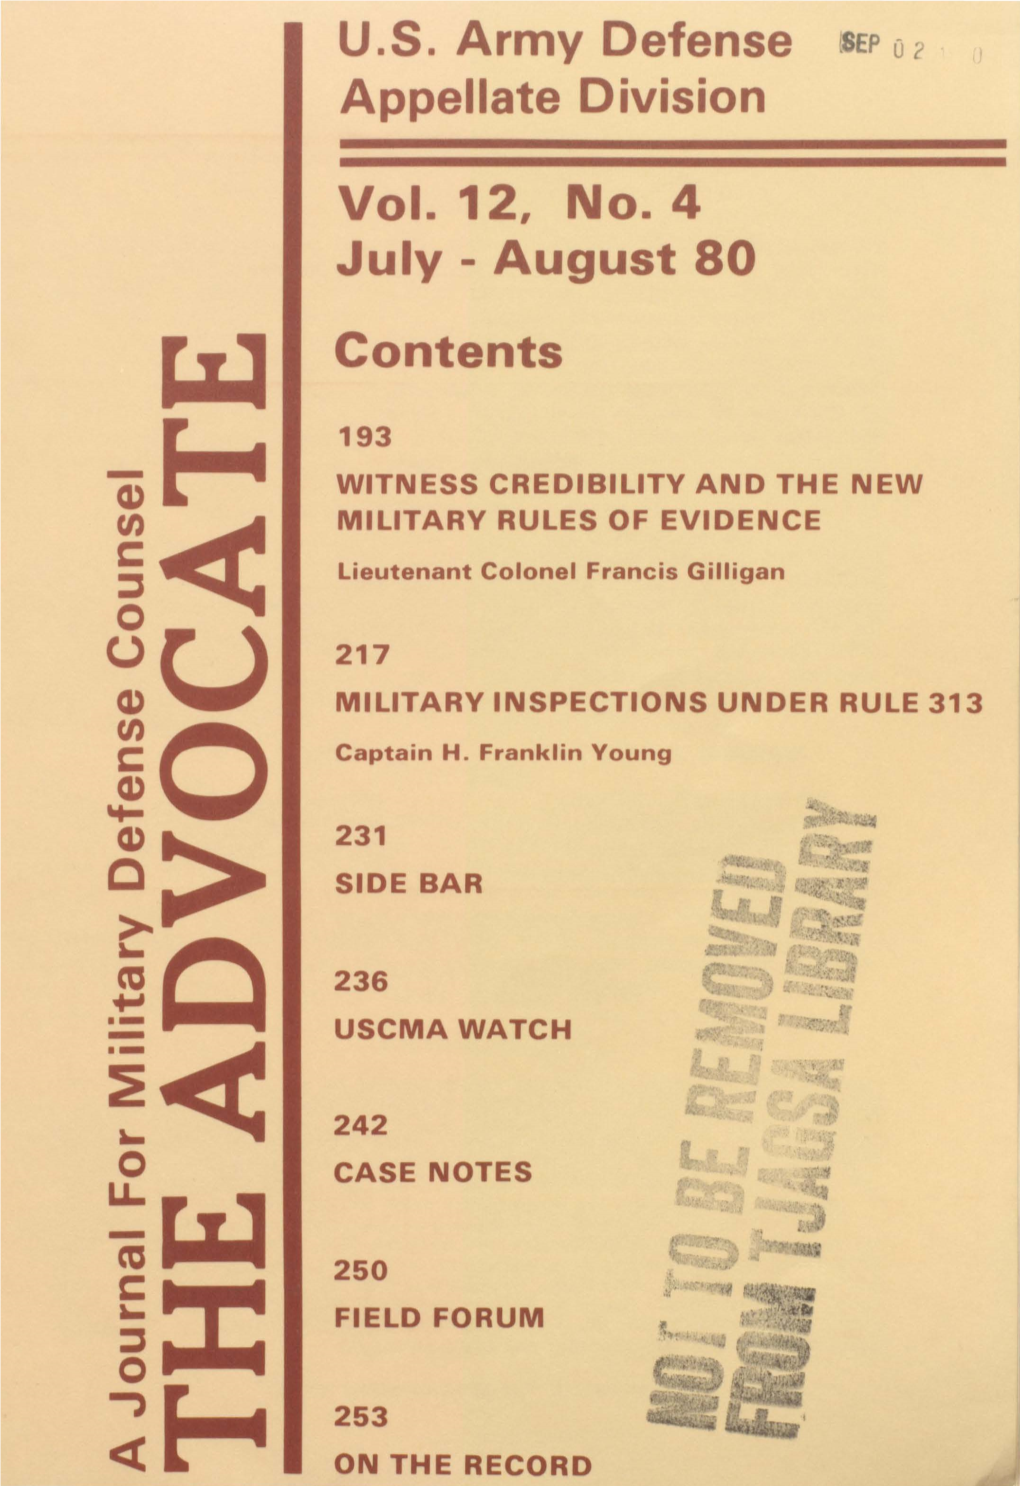 The Advocate, Vol. 12, No. 4, July-August 1980